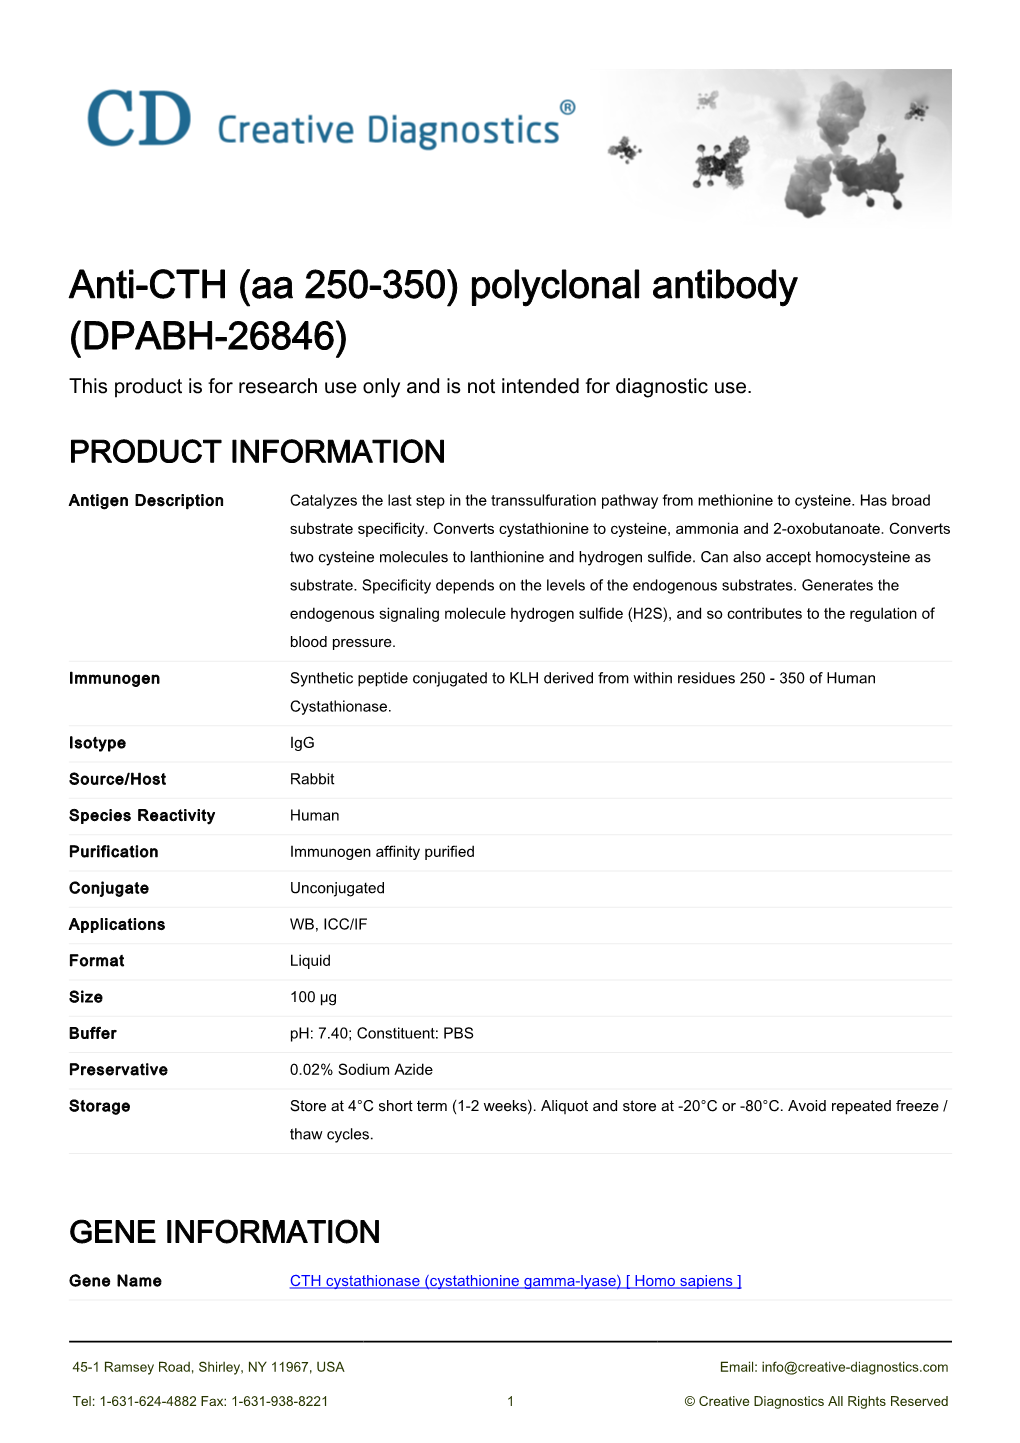 Anti-CTH (Aa 250-350) Polyclonal Antibody (DPABH-26846) This Product Is for Research Use Only and Is Not Intended for Diagnostic Use